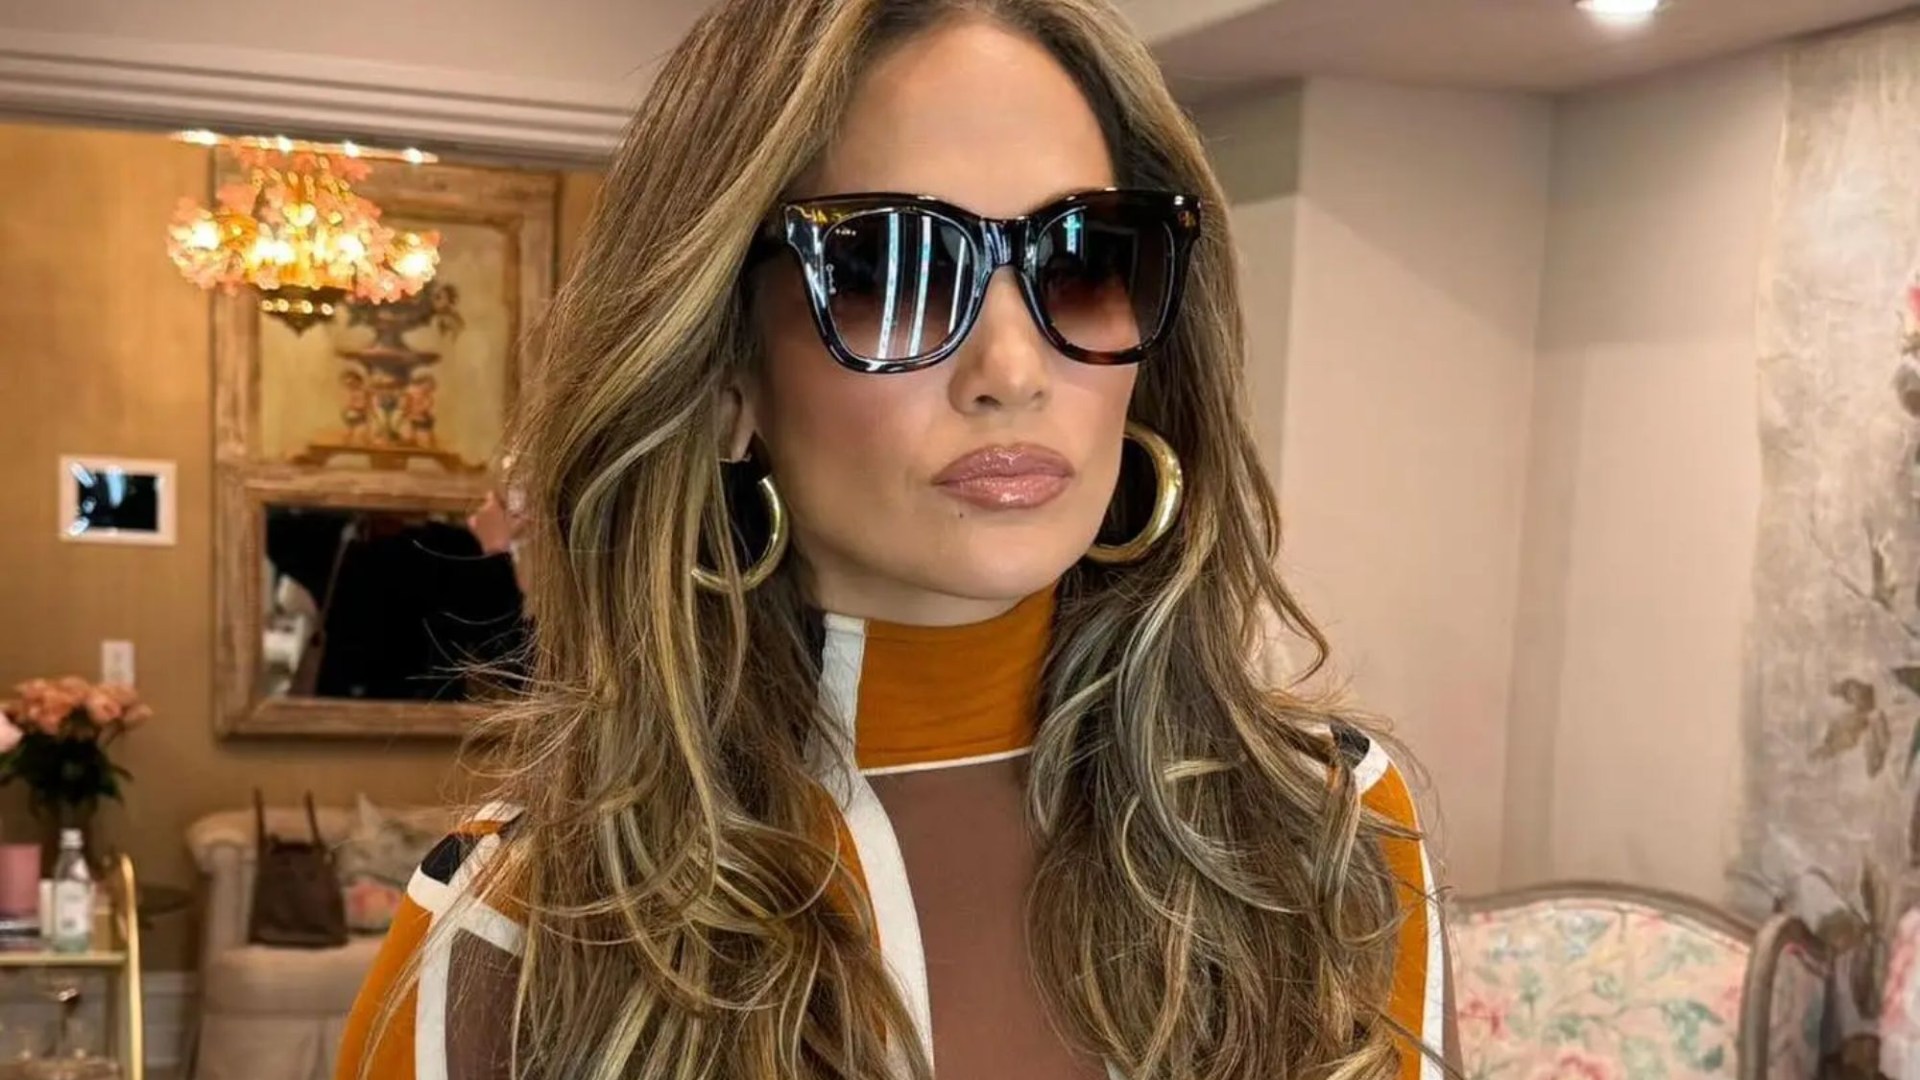 “Jennifer Lopez Stuns in 60s-Inspired Matching Set at Boozy Brunch for Her Cocktail Brand” – Luxury Fashion and Celebrity Lifestyle at Its Finest With JLo at 54!